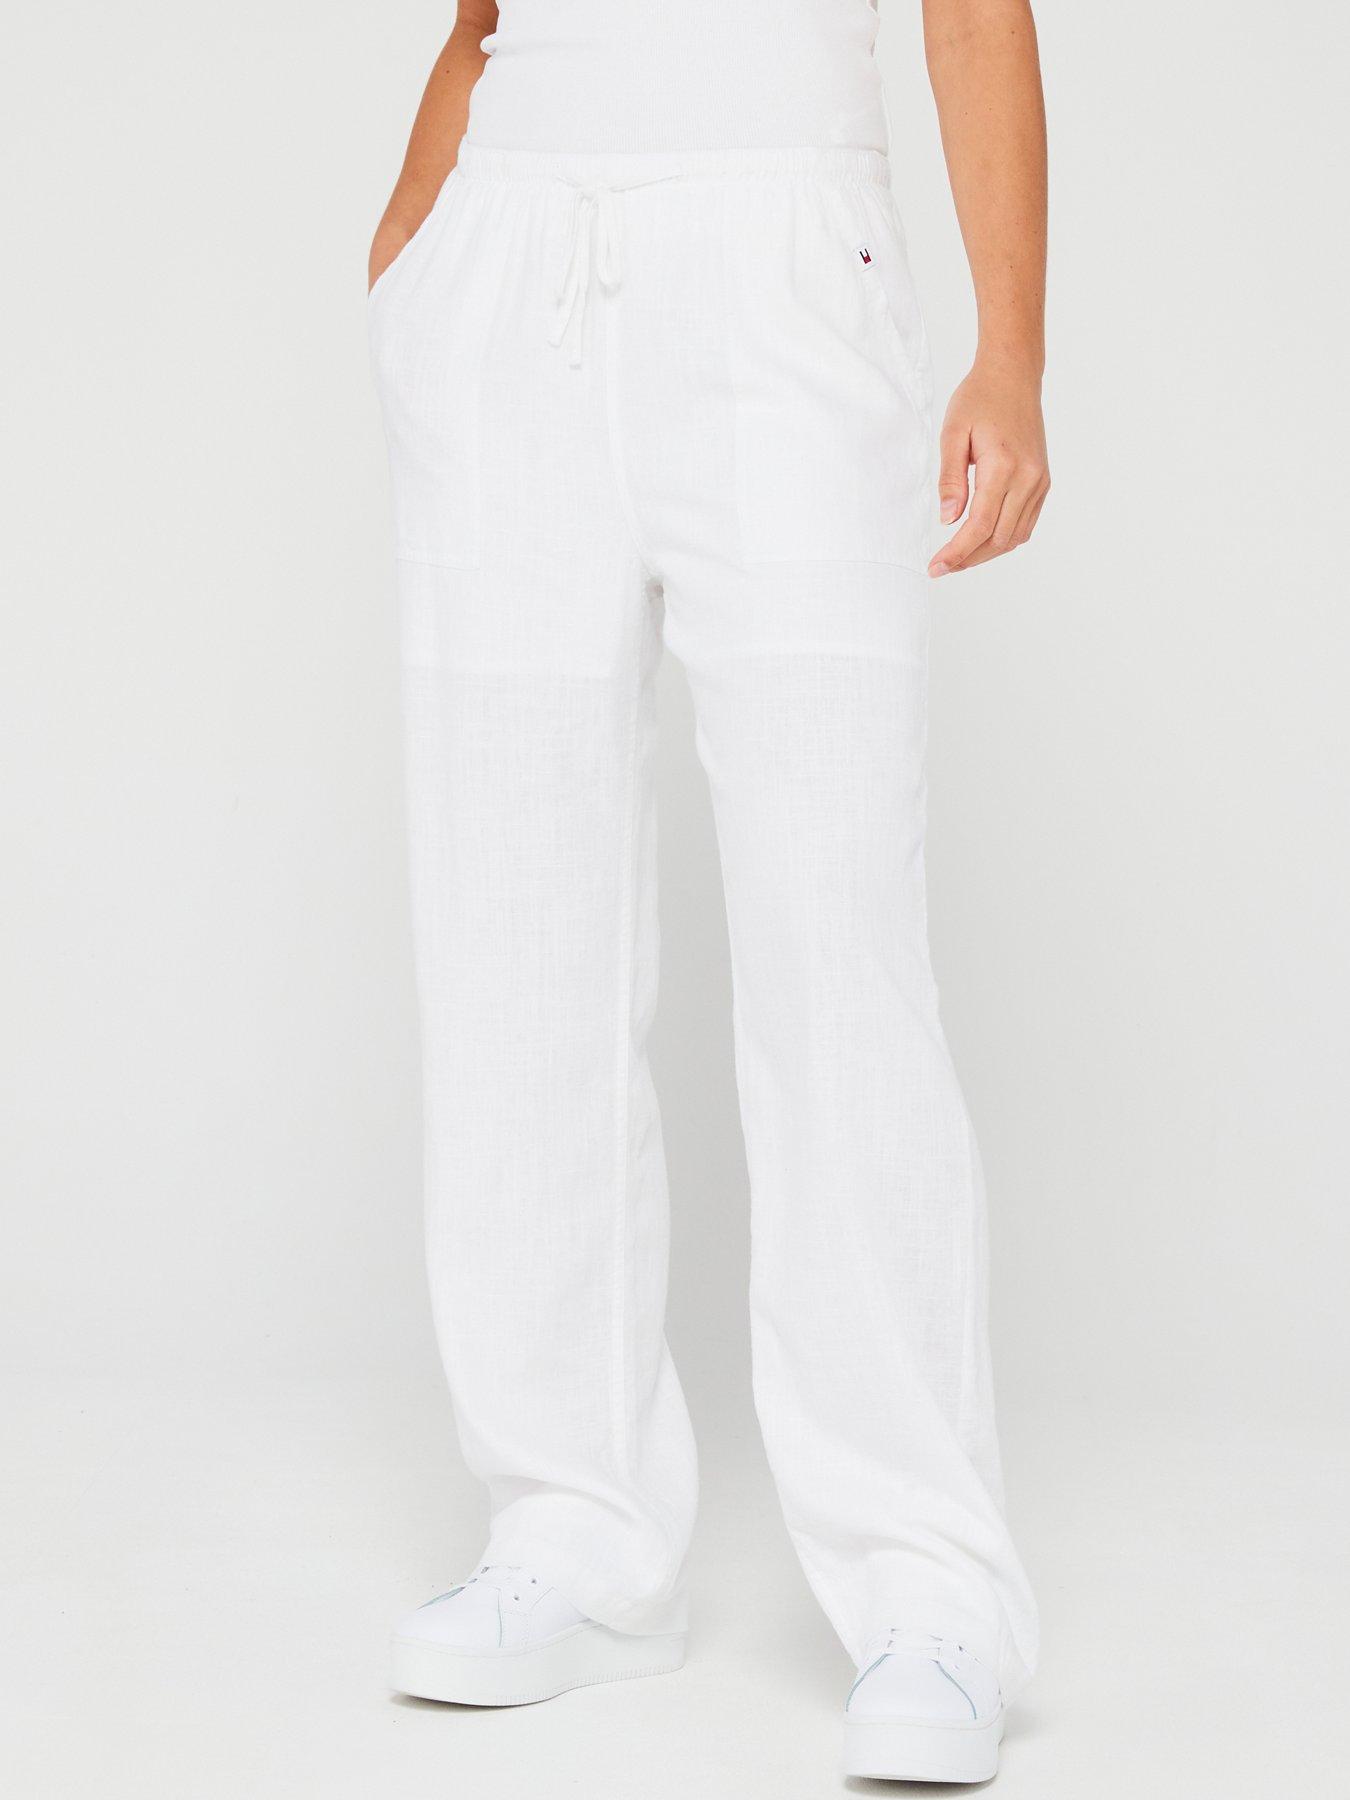 Ready To Fly Parachute Pants ★ White